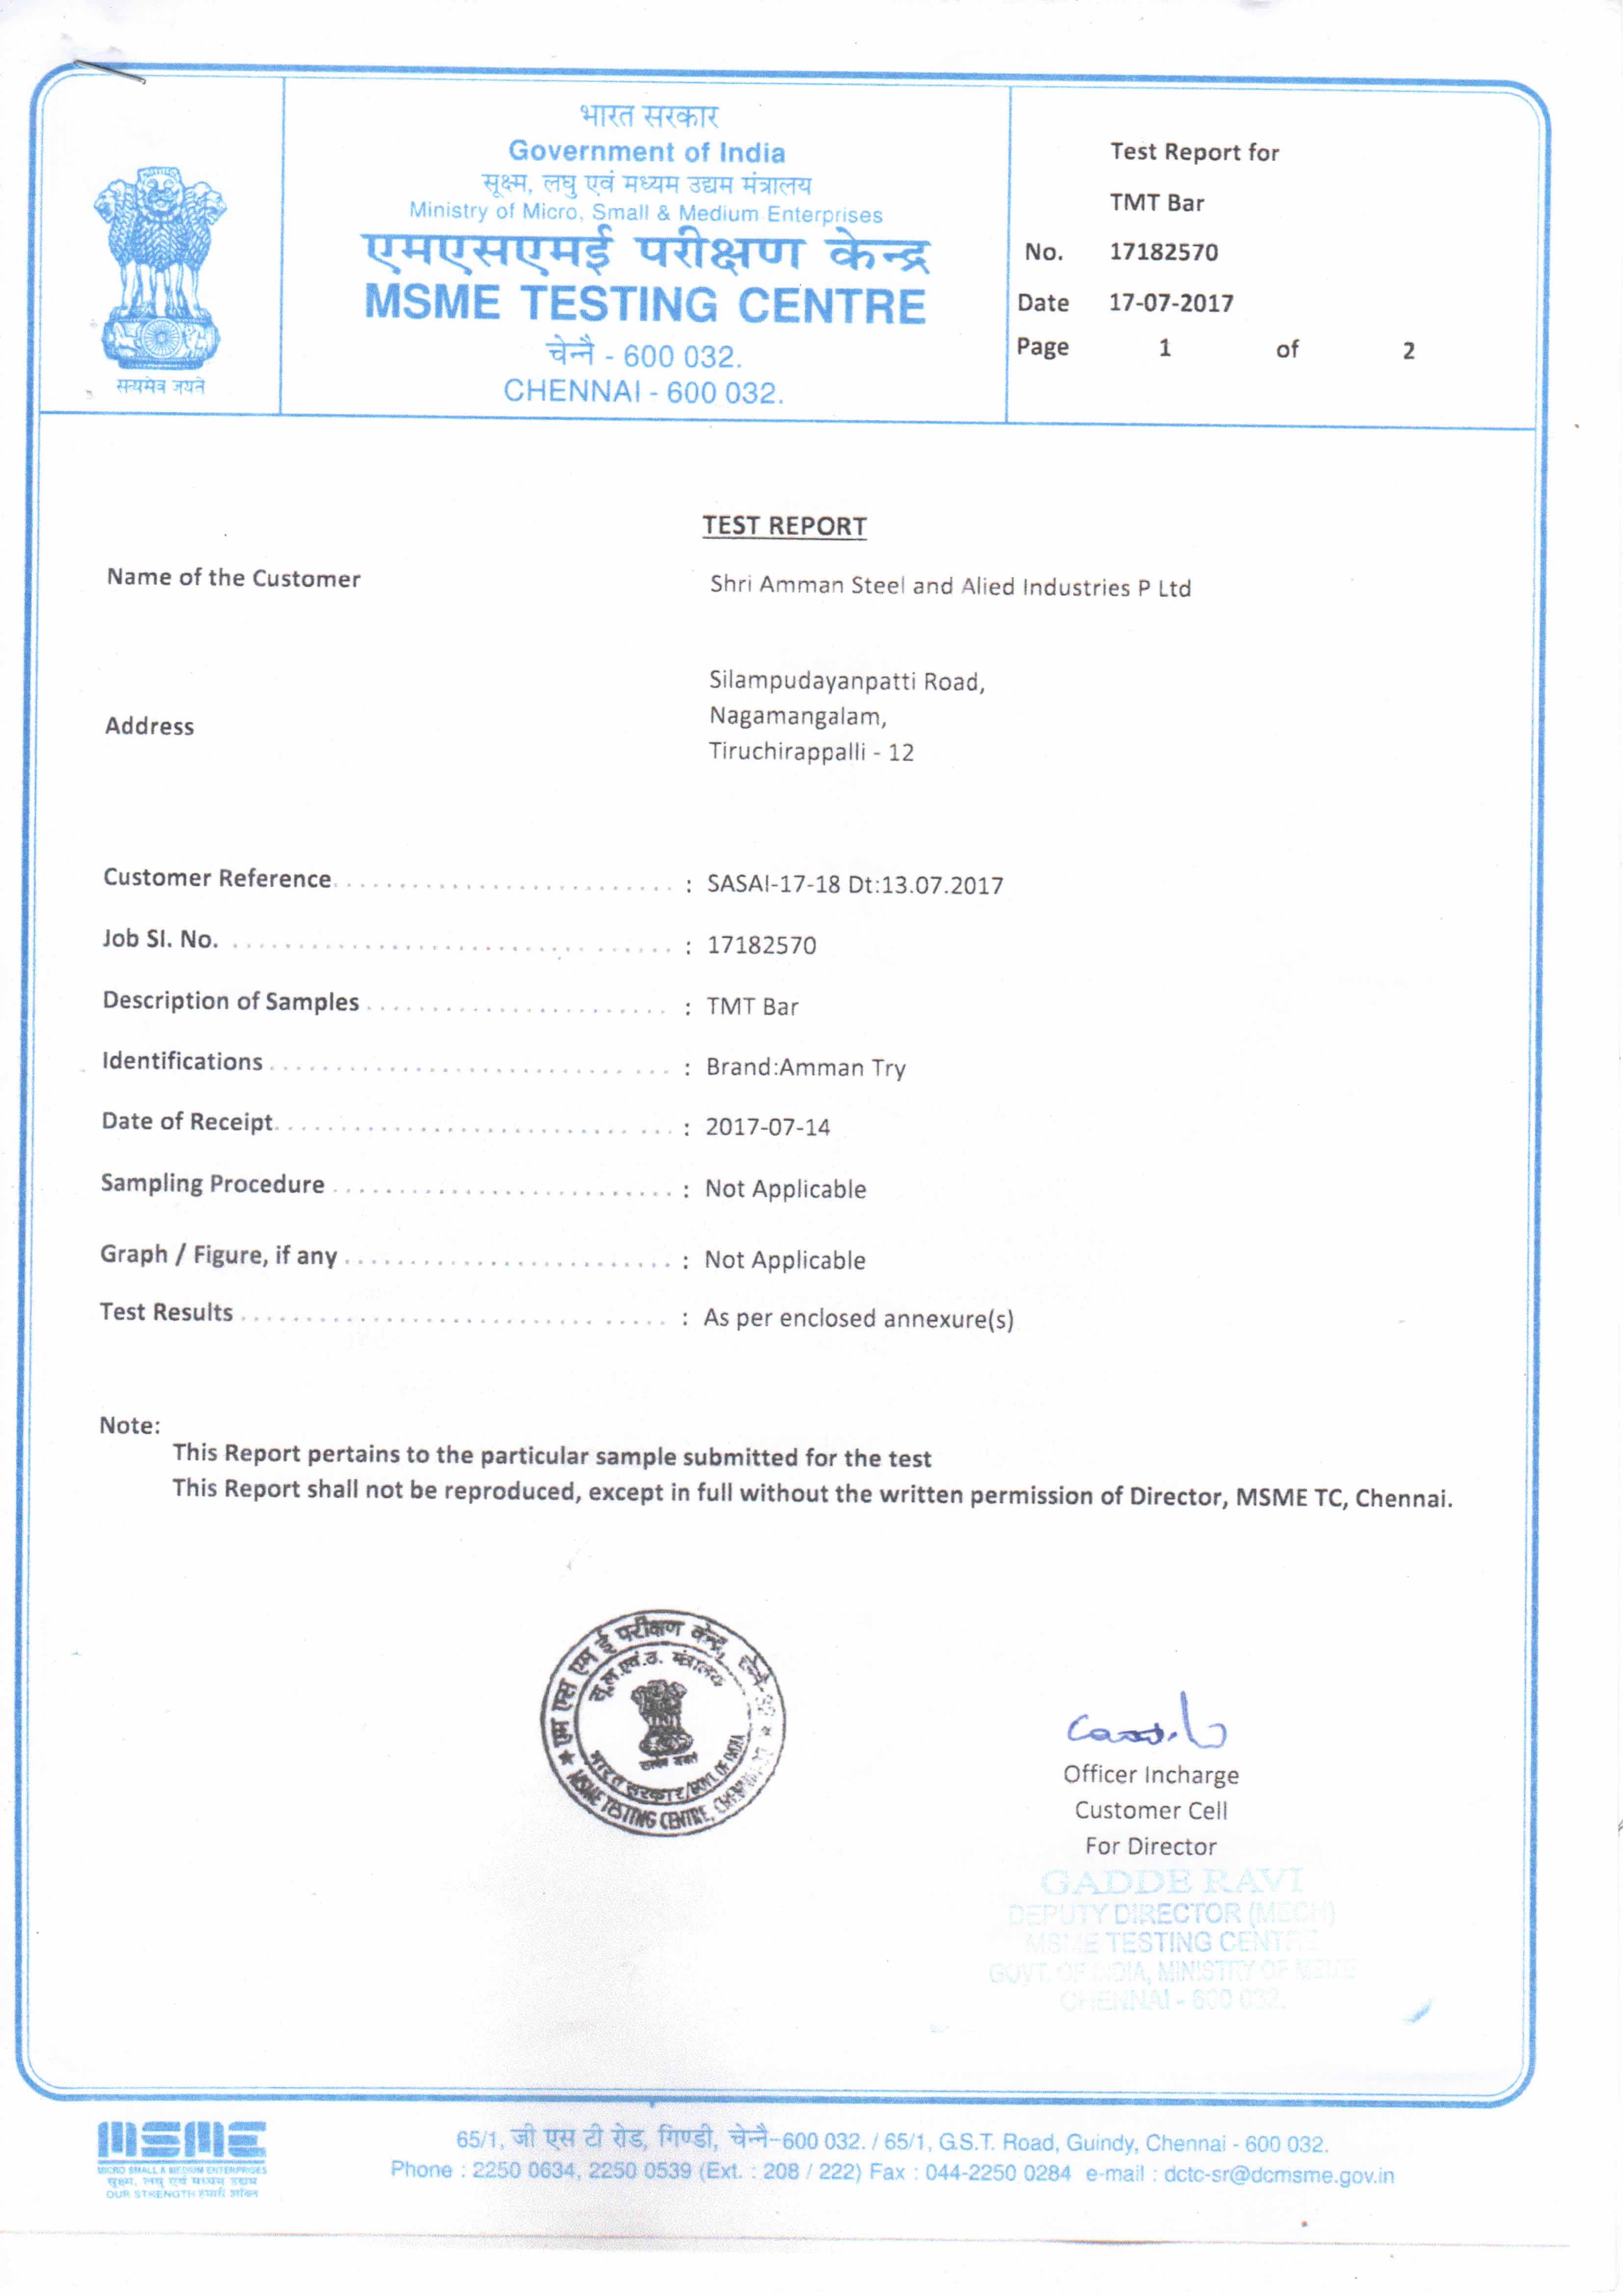 MSME Test Certificate 17 07 17 (Chemical) 1 min AMMAN TRY